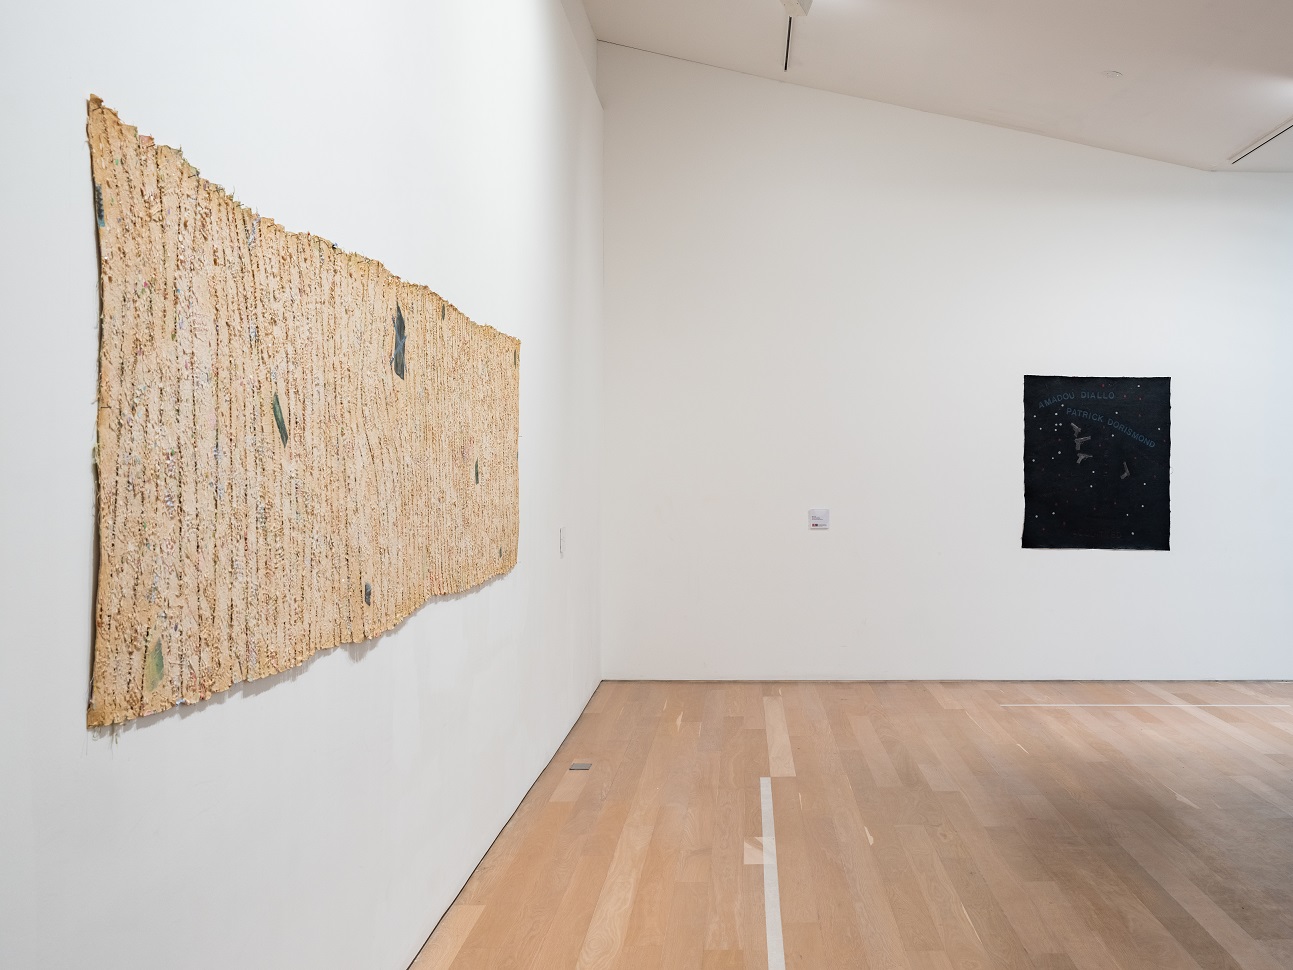 Guggenheim Abu Dhabi Presents The Works Of Contemporary Artists Howardena Pindell And Khalil Rabah